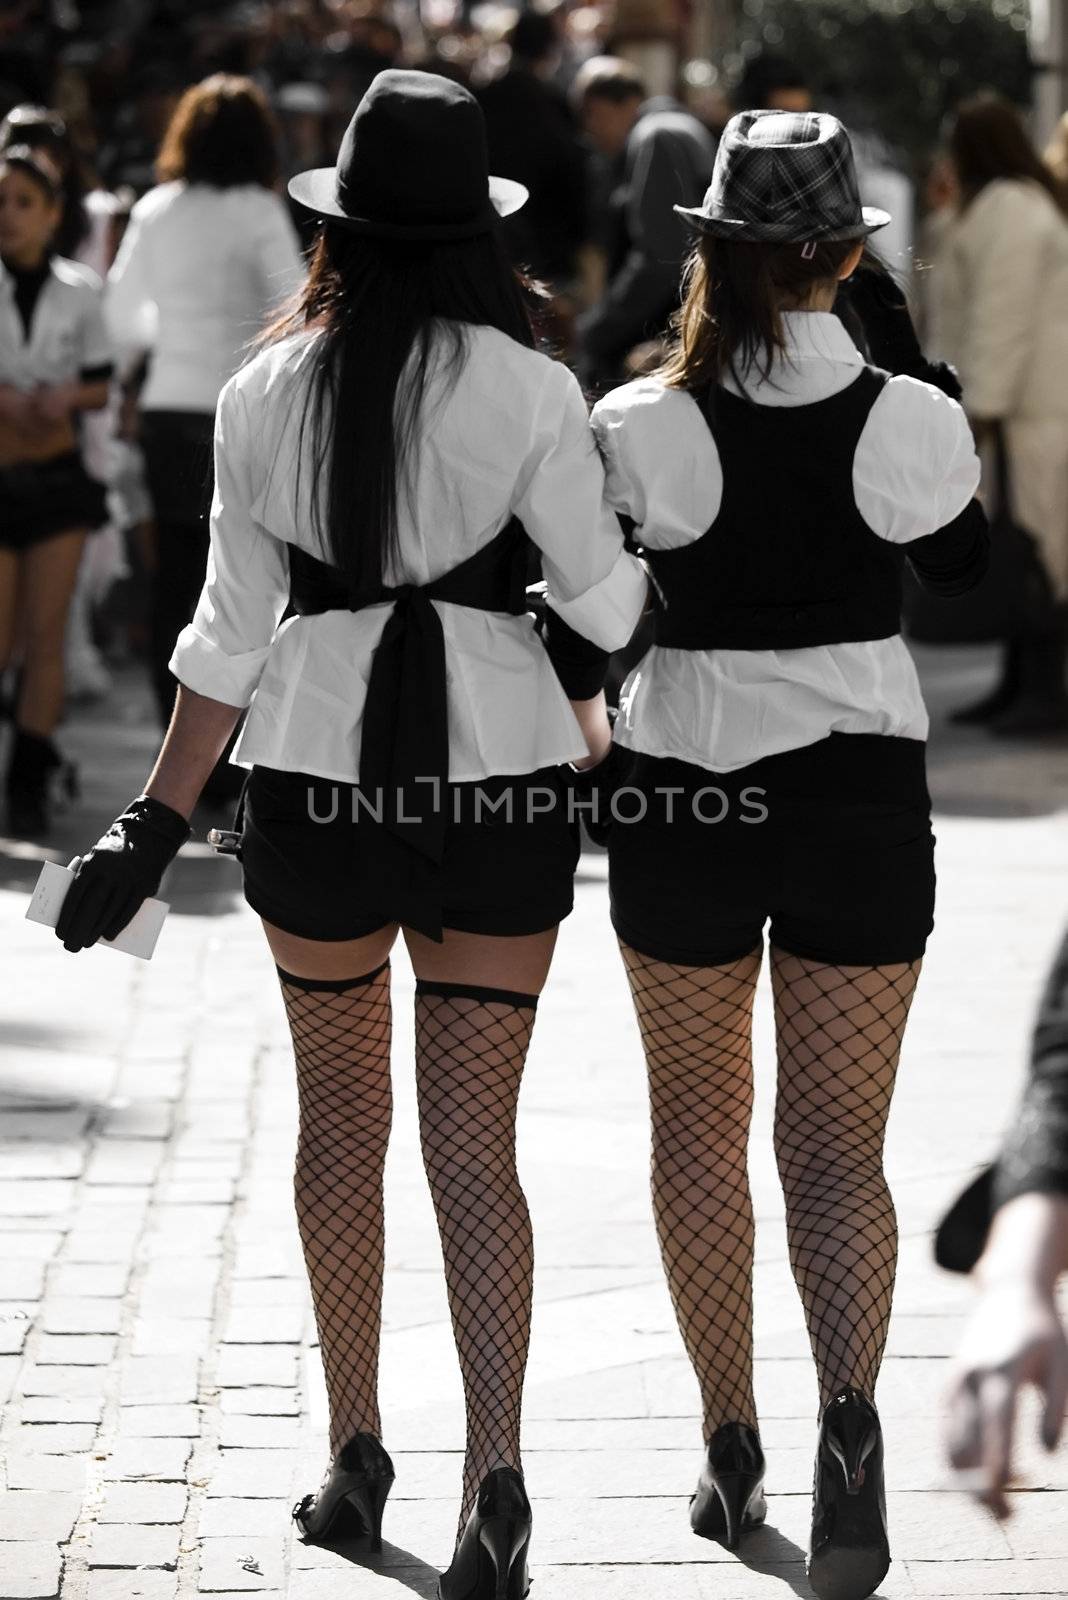 Two women walking in the street wearing sexy and provocative clothing